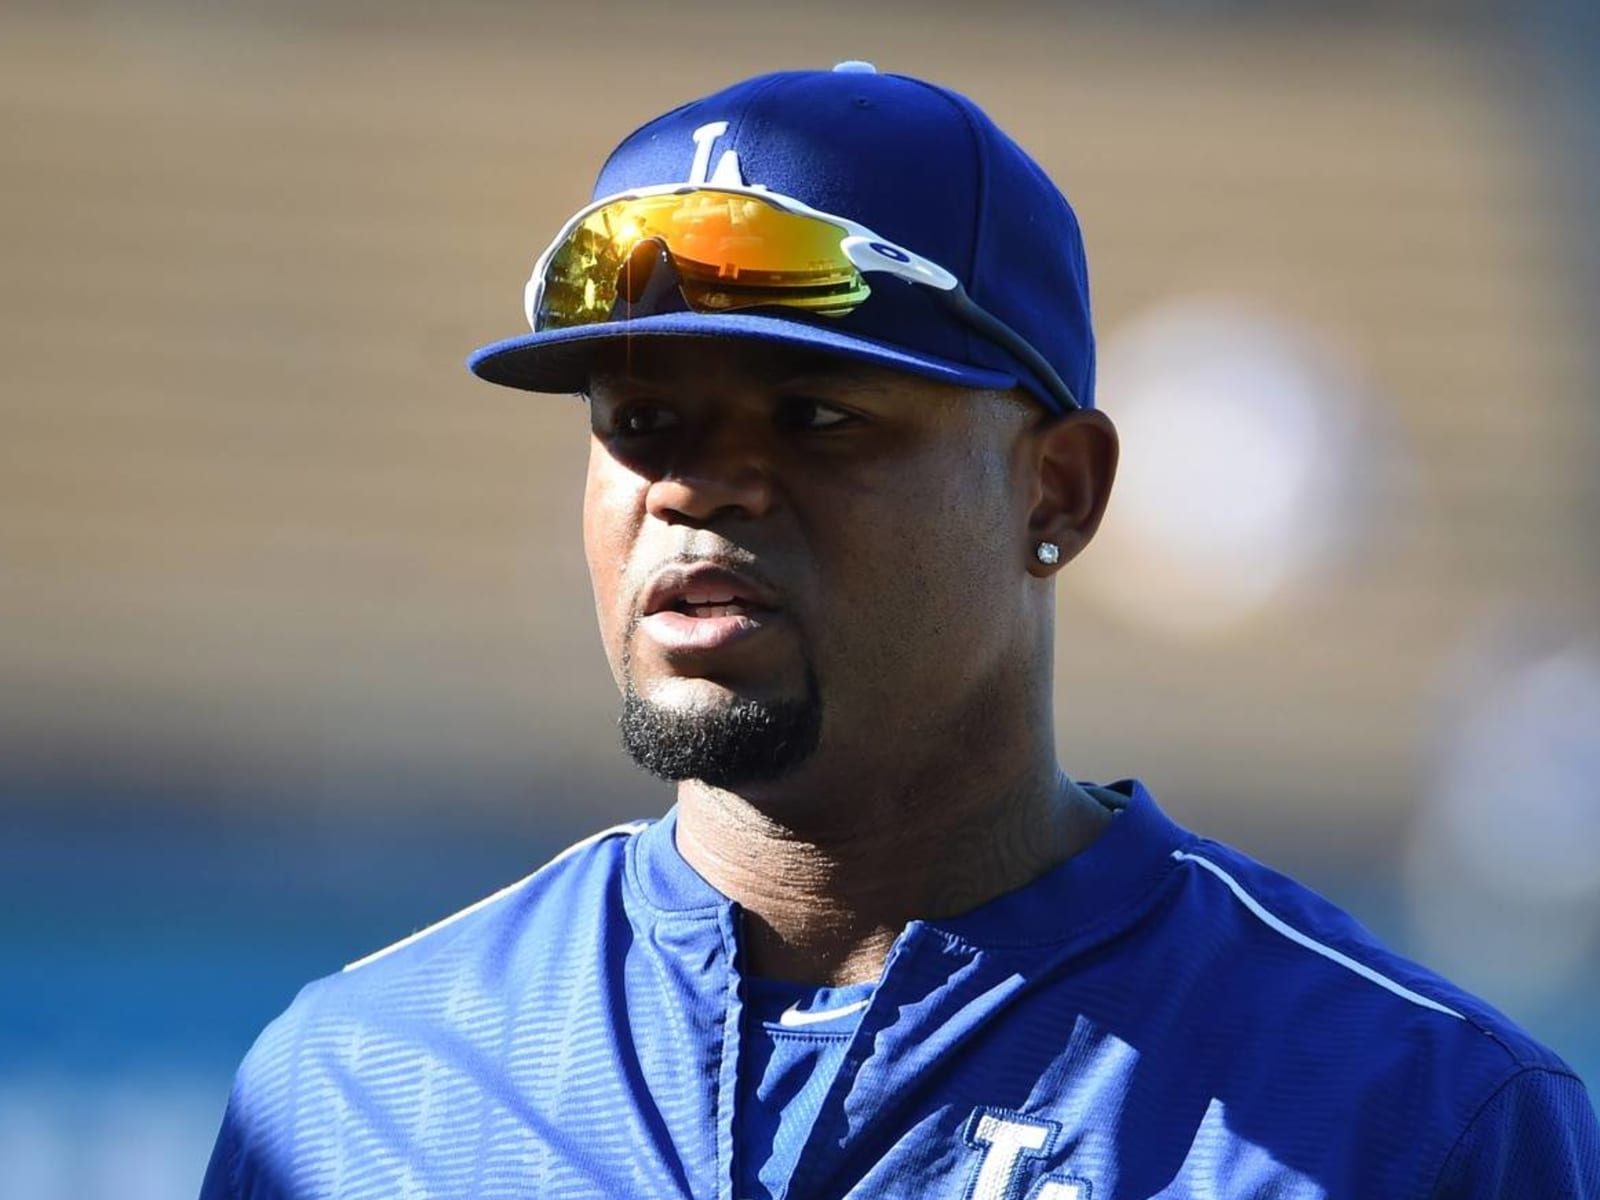 Two people drowned in pool at Carl Crawford's house?